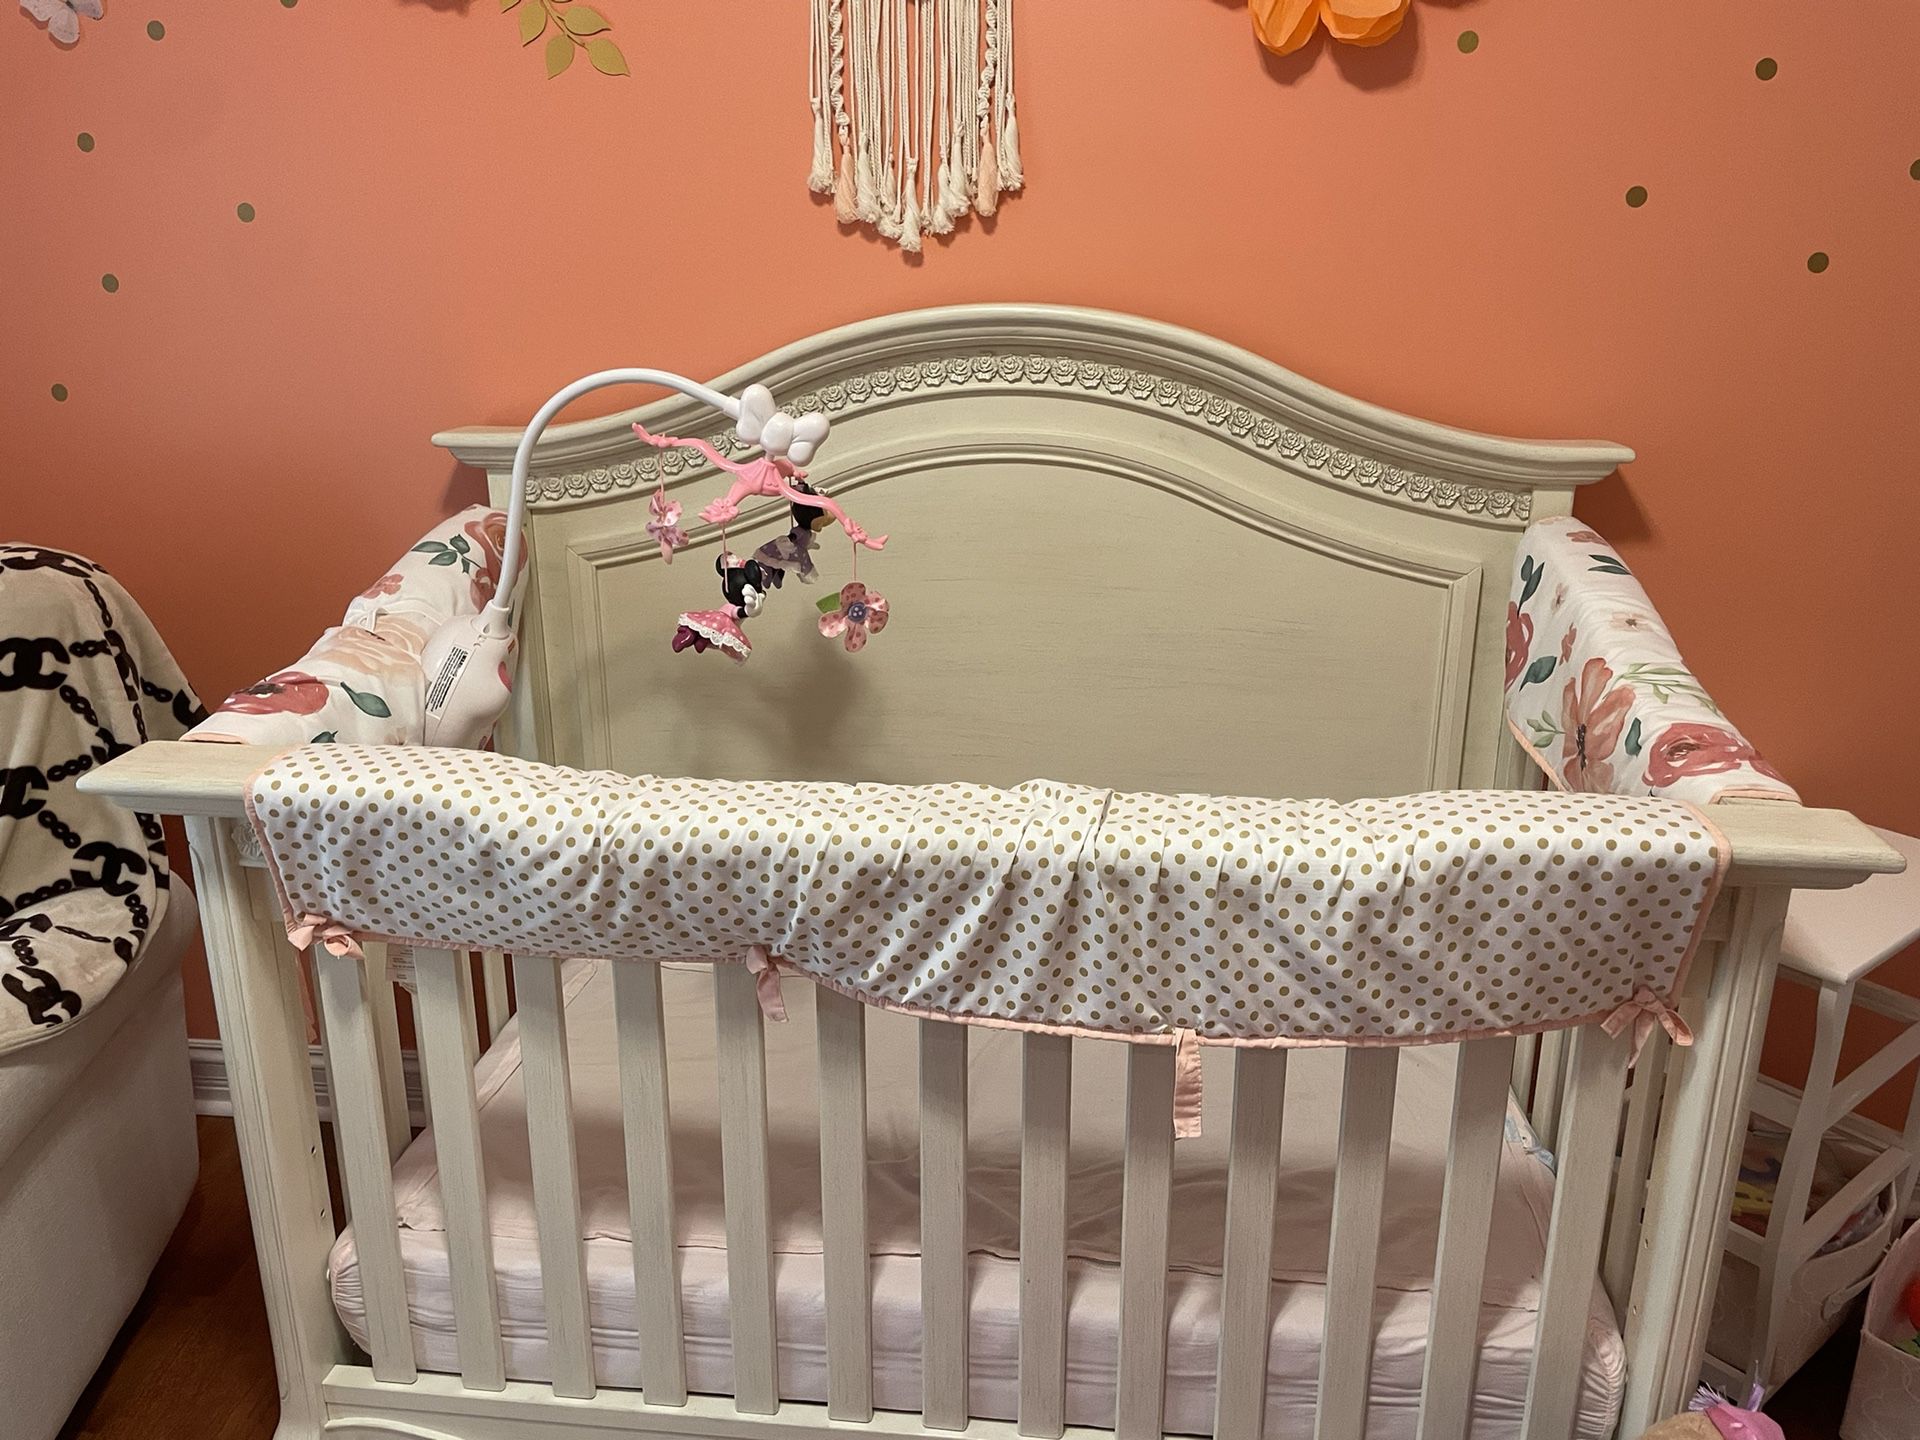 Double sided 3 piece crib covers, standard fit, gold dot, coral florals